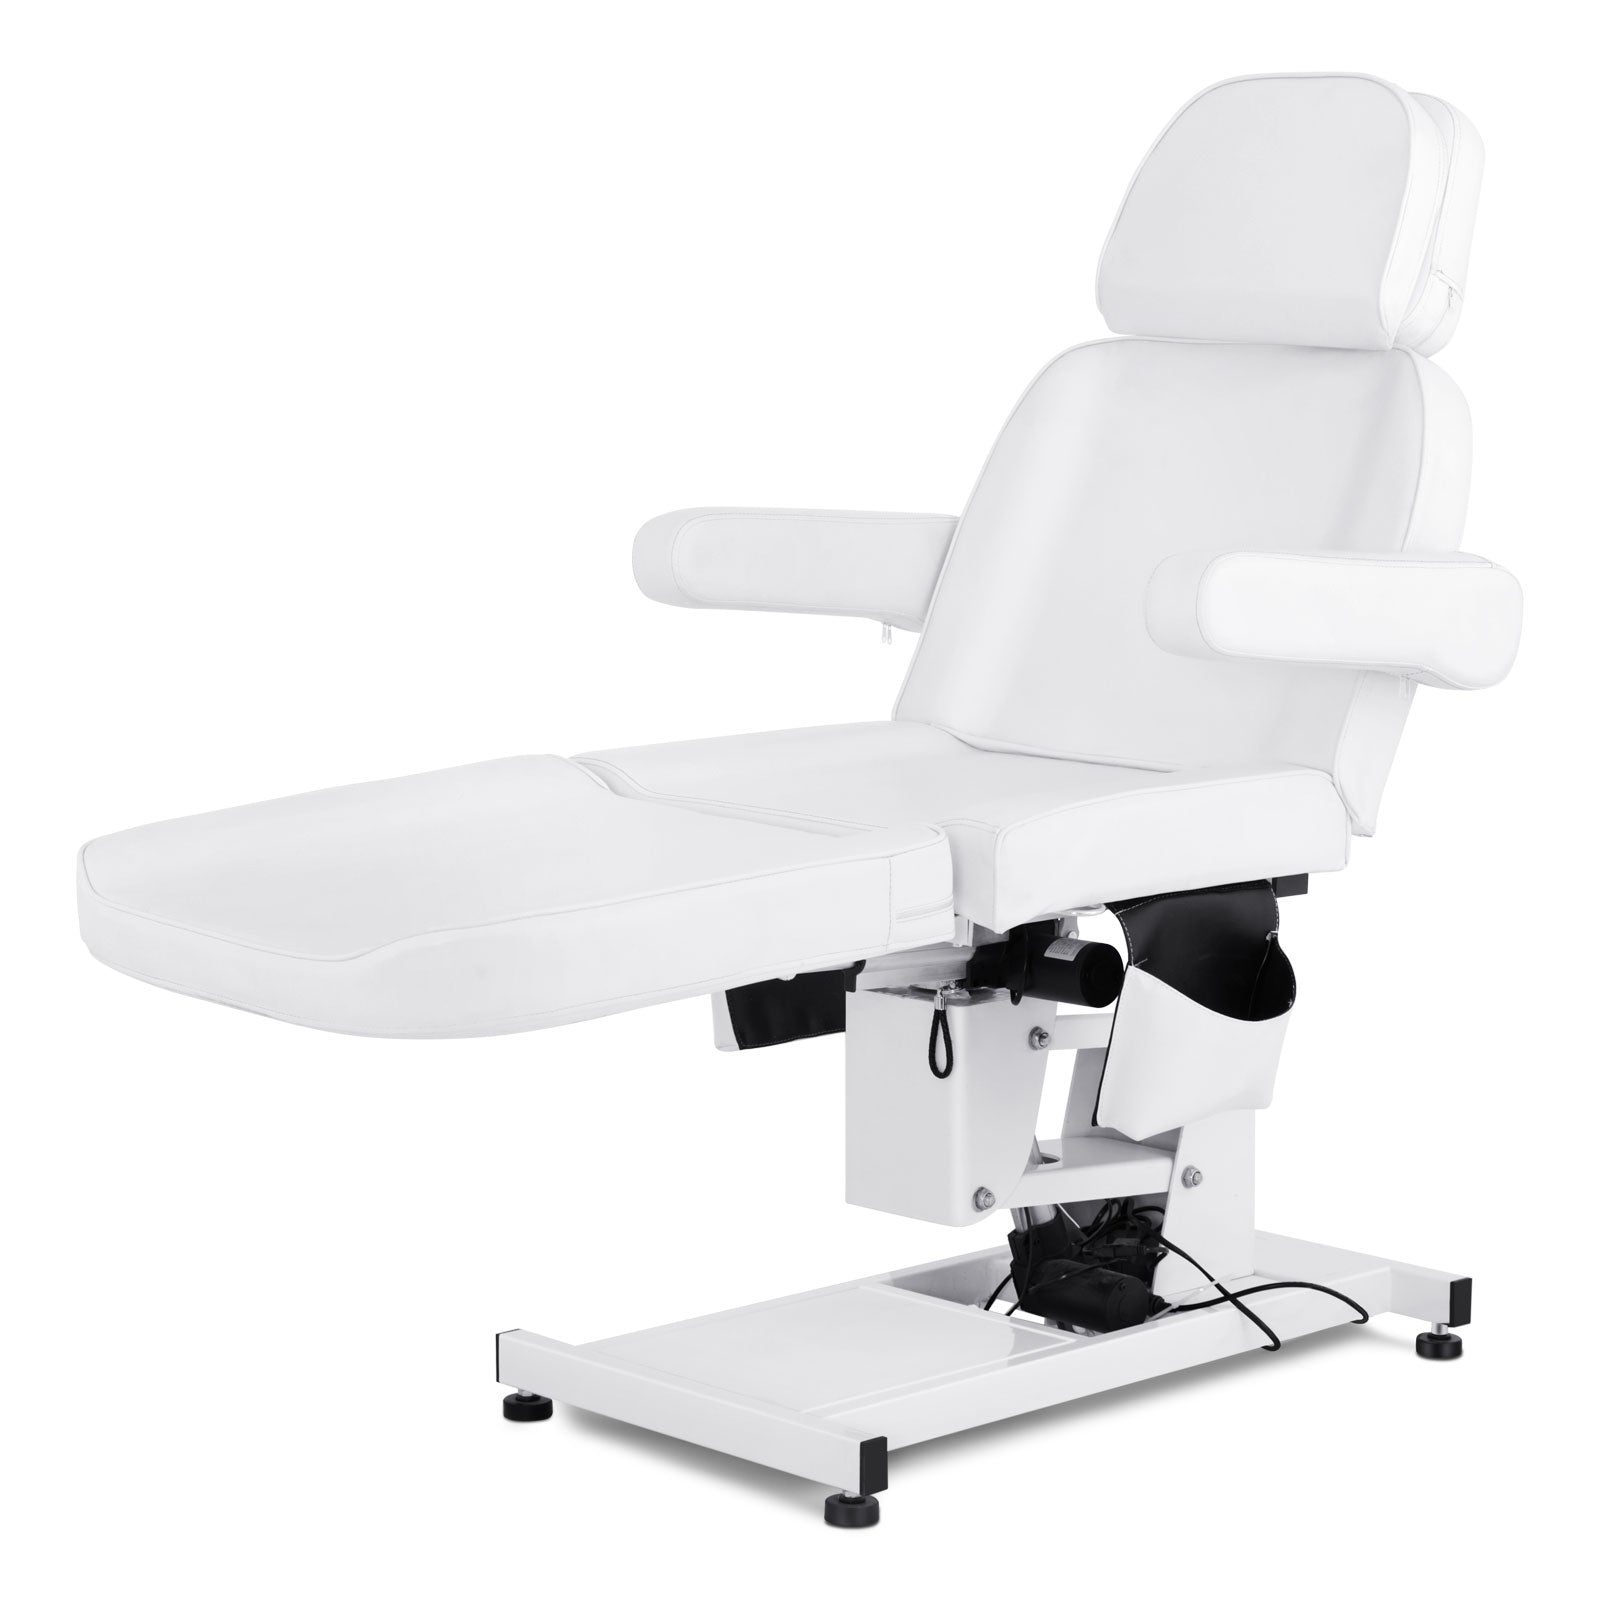 #2907 3 Motor Electrical Facial Bed for Esthetician 110V Massage Table Beauty Bed Medical Aesthetic Tattoo Chair with Rotatable Armrests